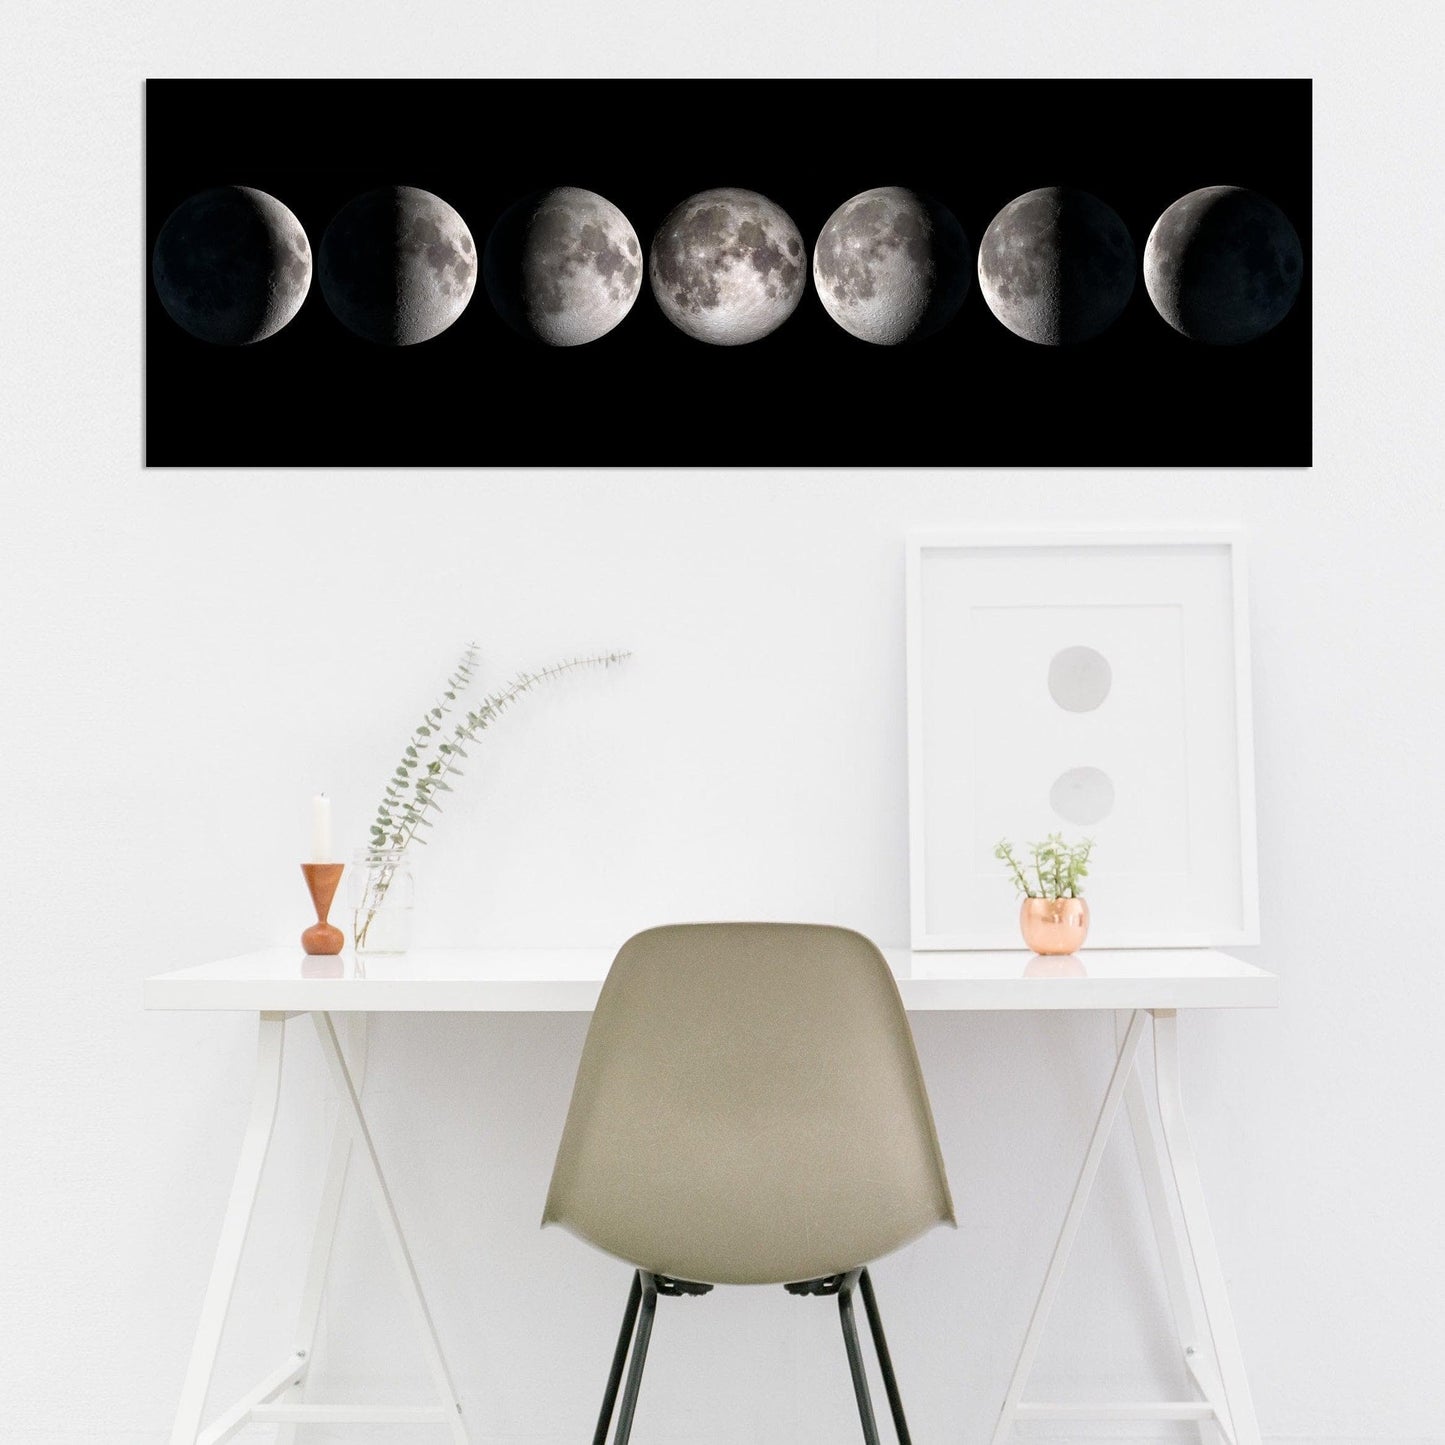 Views of our Moon’s Phases in the night sky Glossy Photo Print #P1021